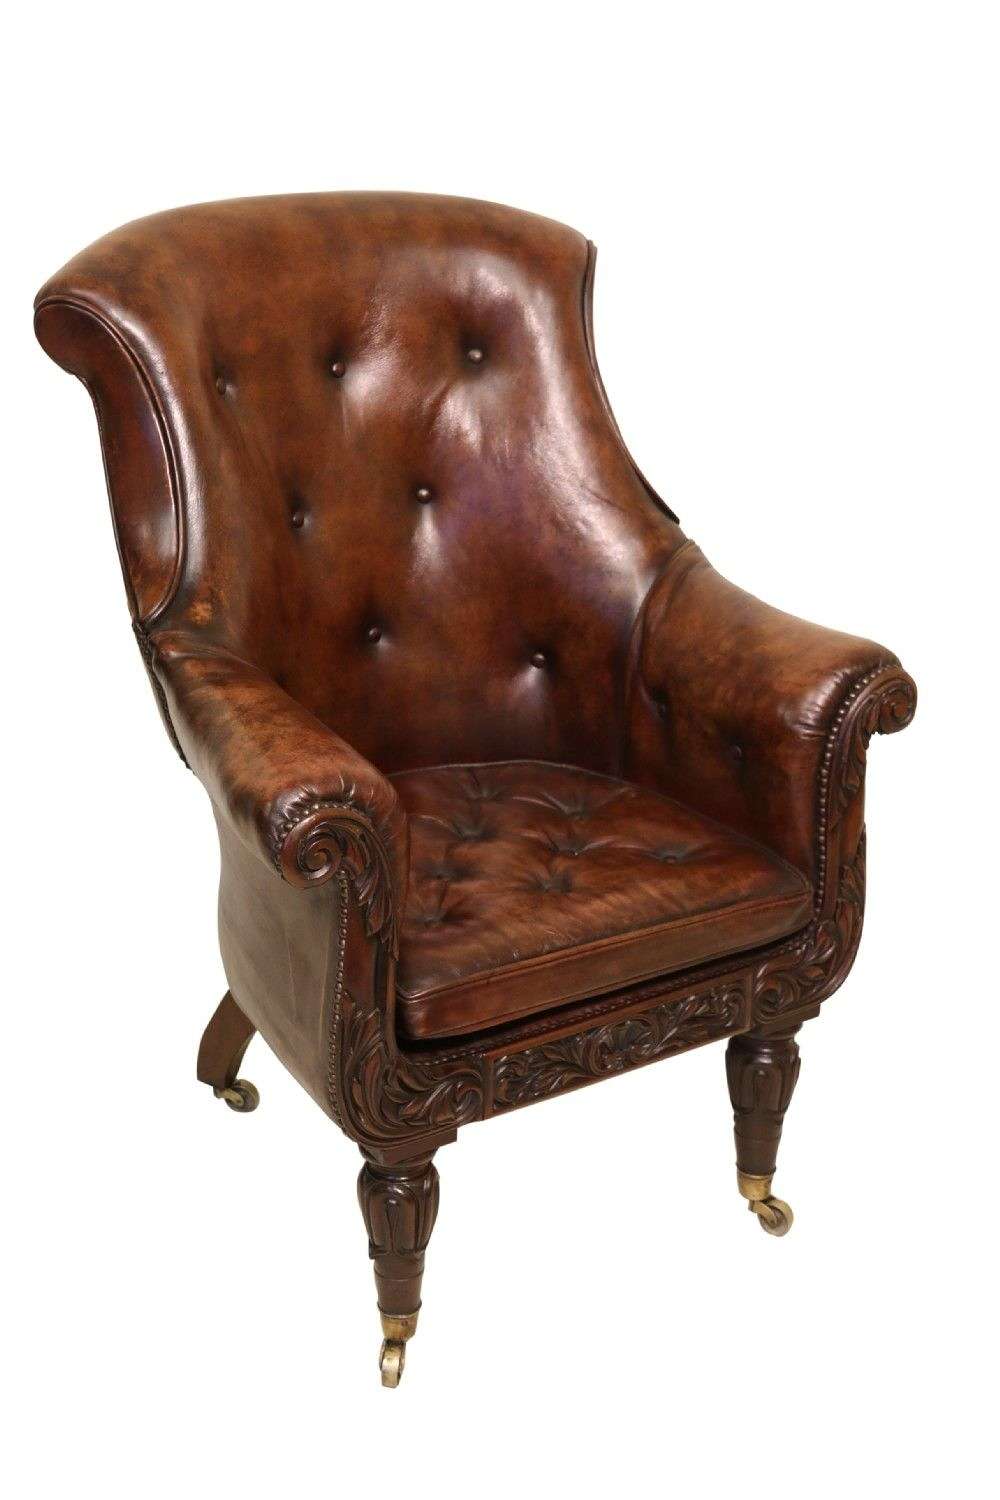 A Fine English Leather Upholstered  Late Regency Library Armchair, Cir